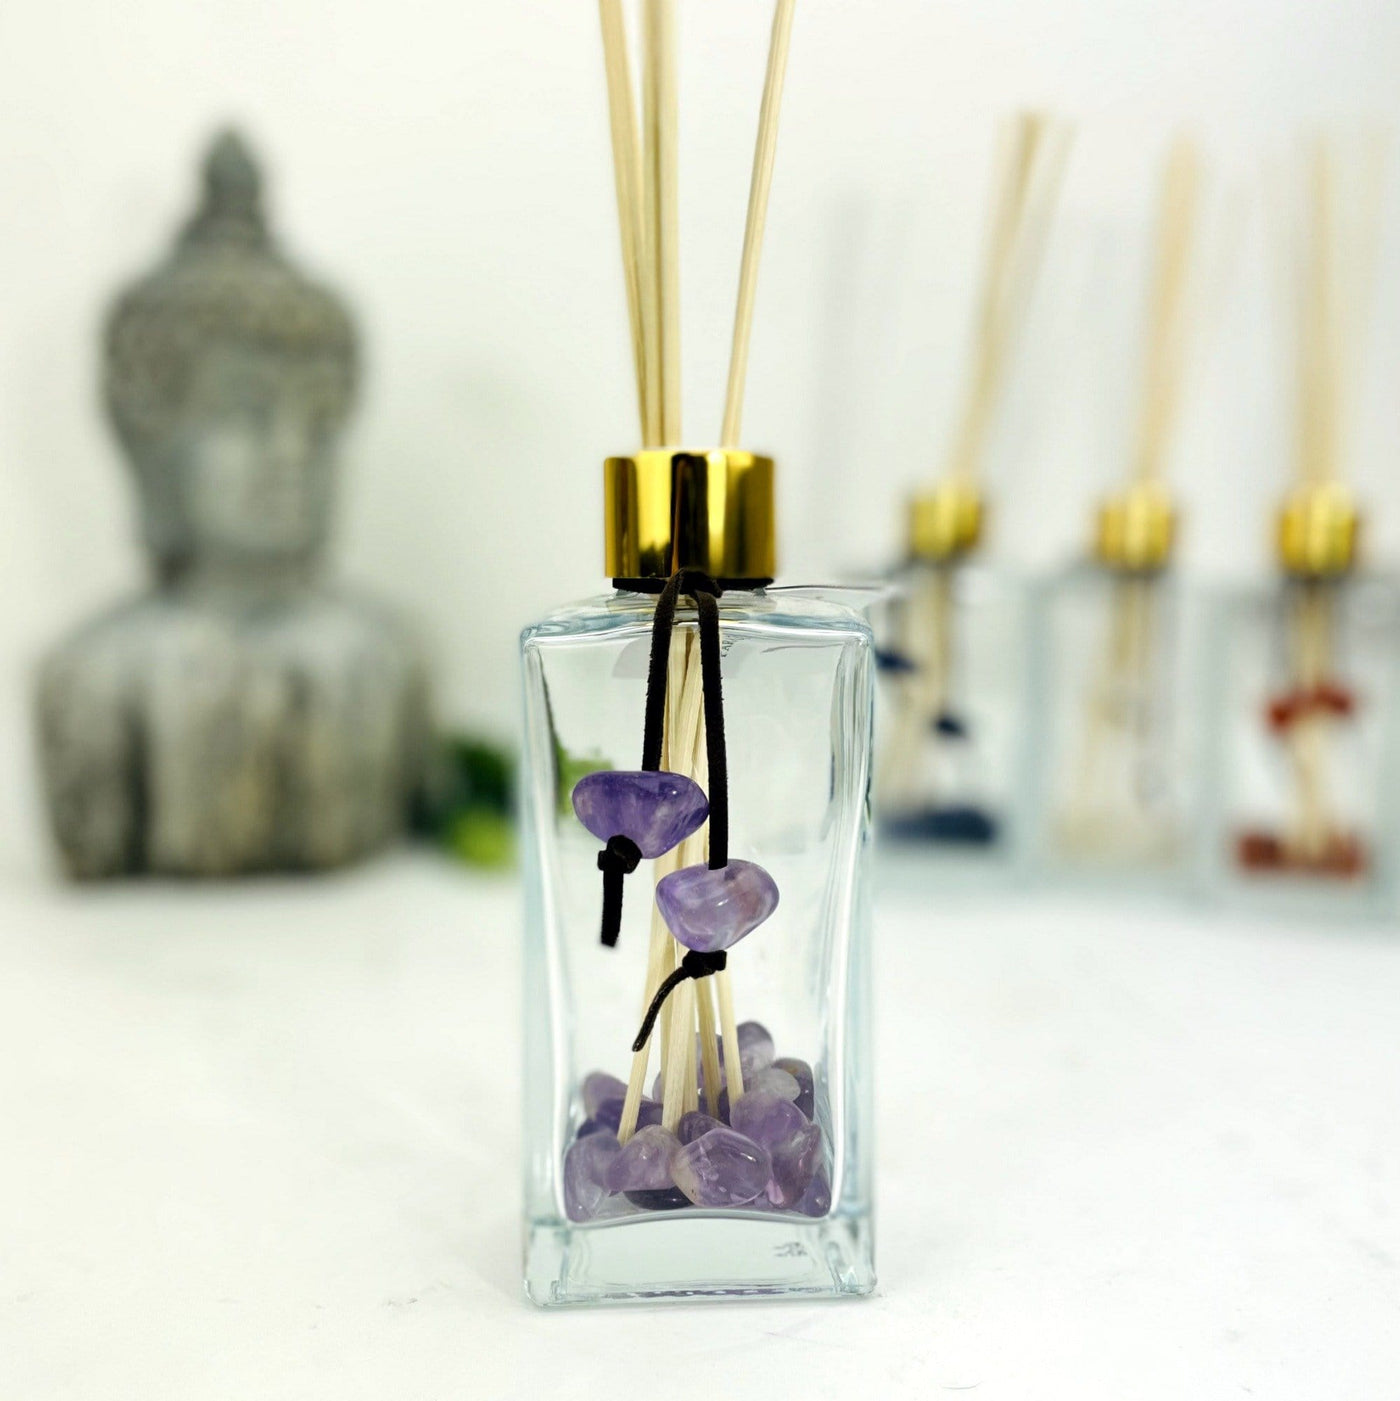 Tumbled Stone Diffuser Bottle--front view shot of glass bottle with amethyst stone on string.